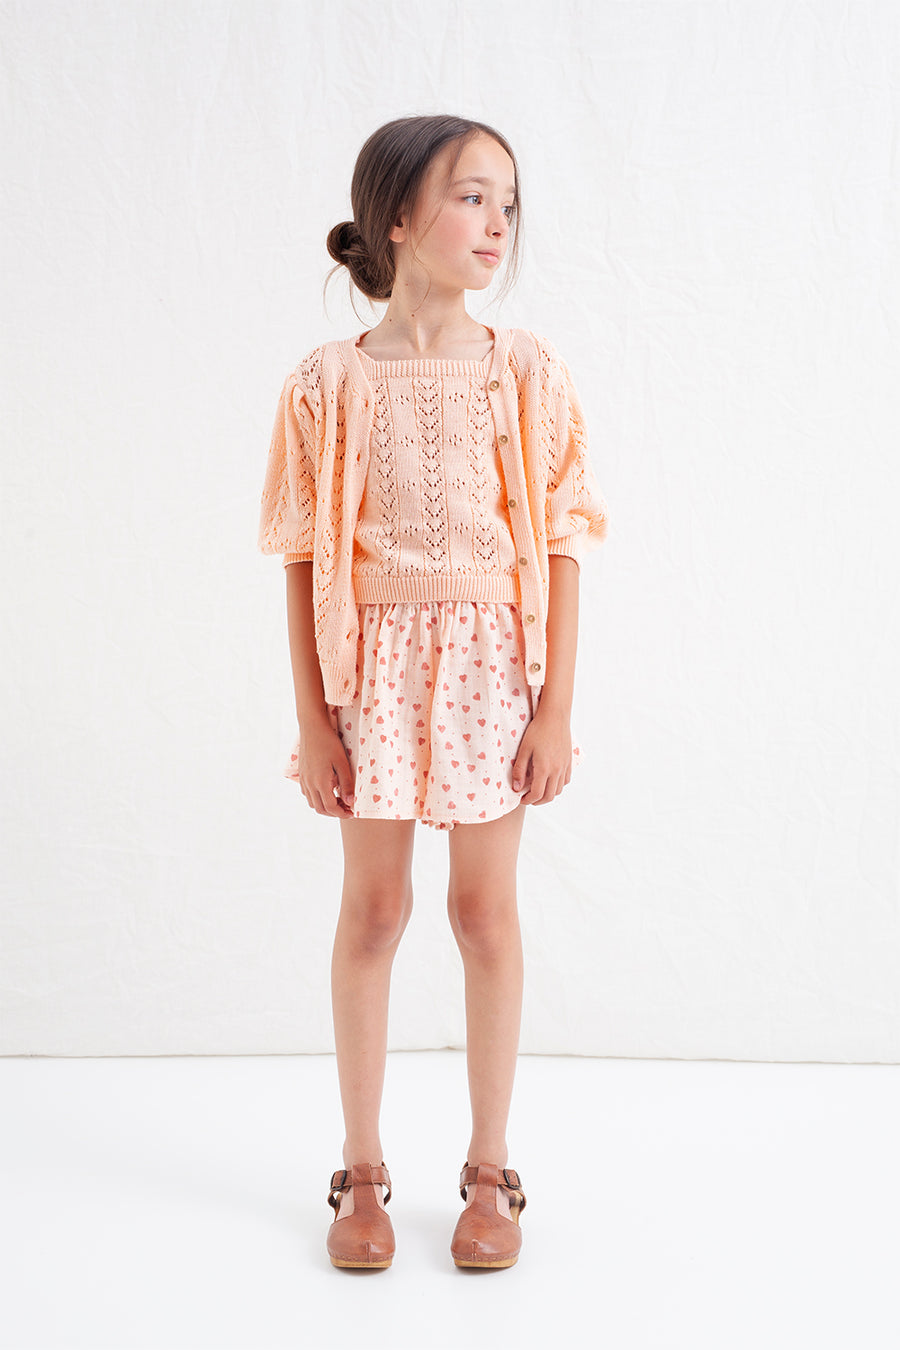 Coral pointelle openwork cardigan By Tocoto Vinatge